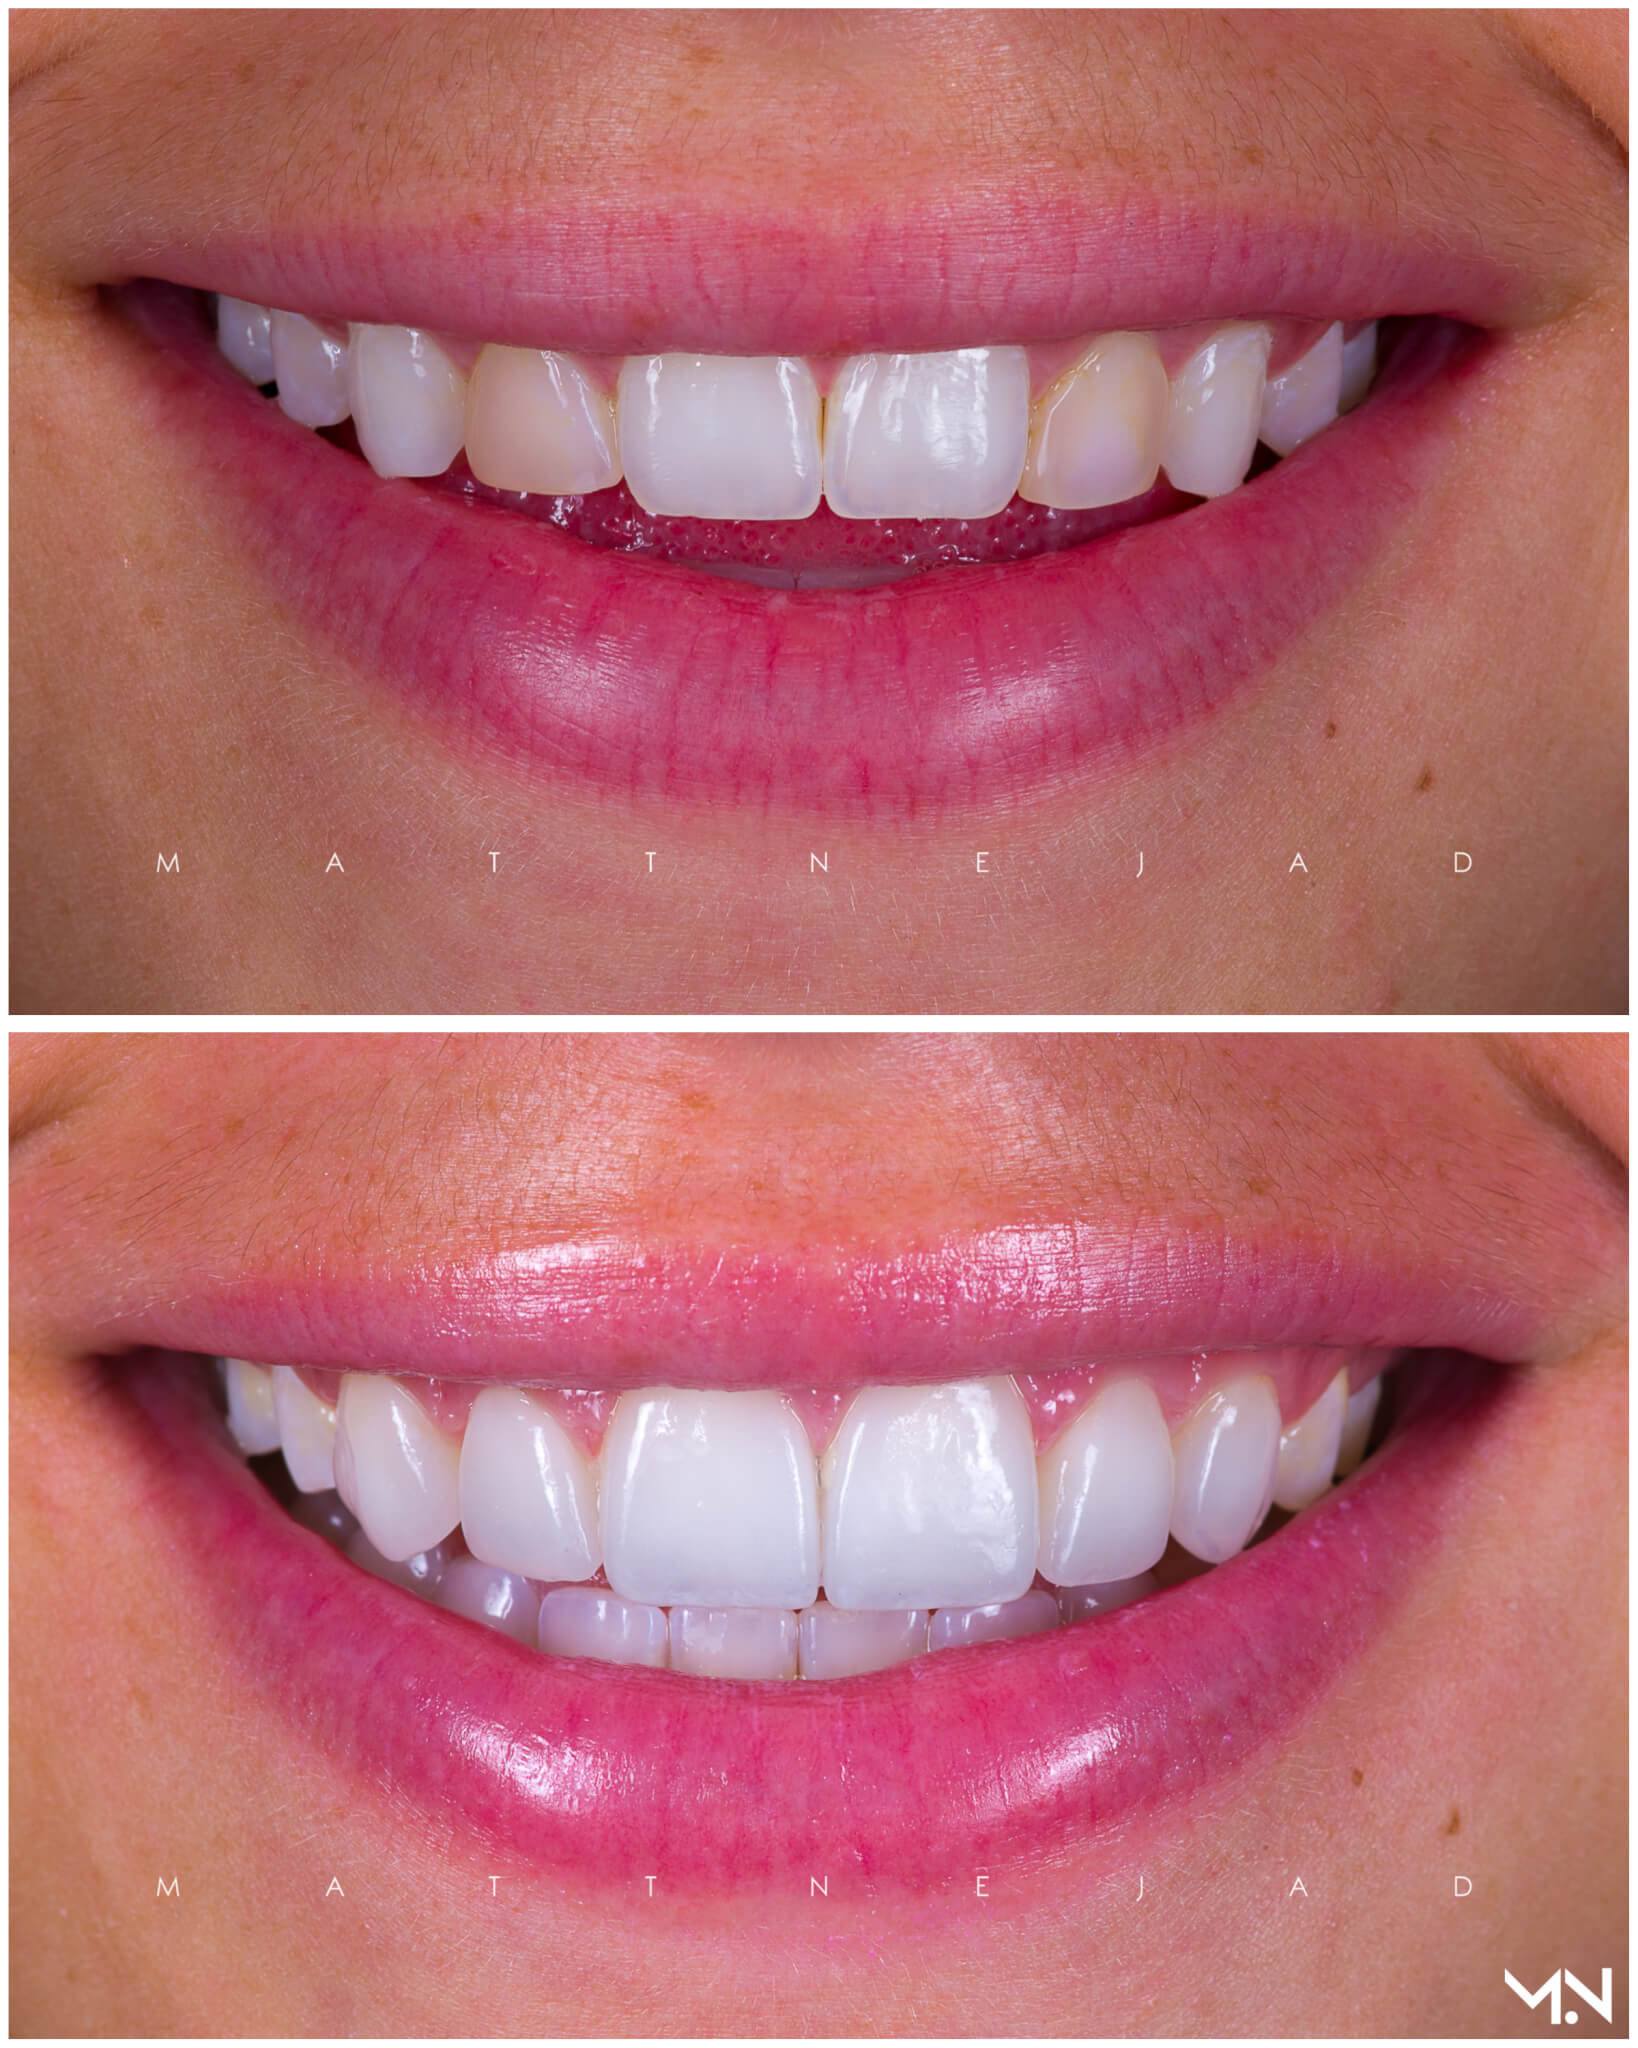 Cosmetic Smile Makeover with 6 Porcelain Veneers- Before and after